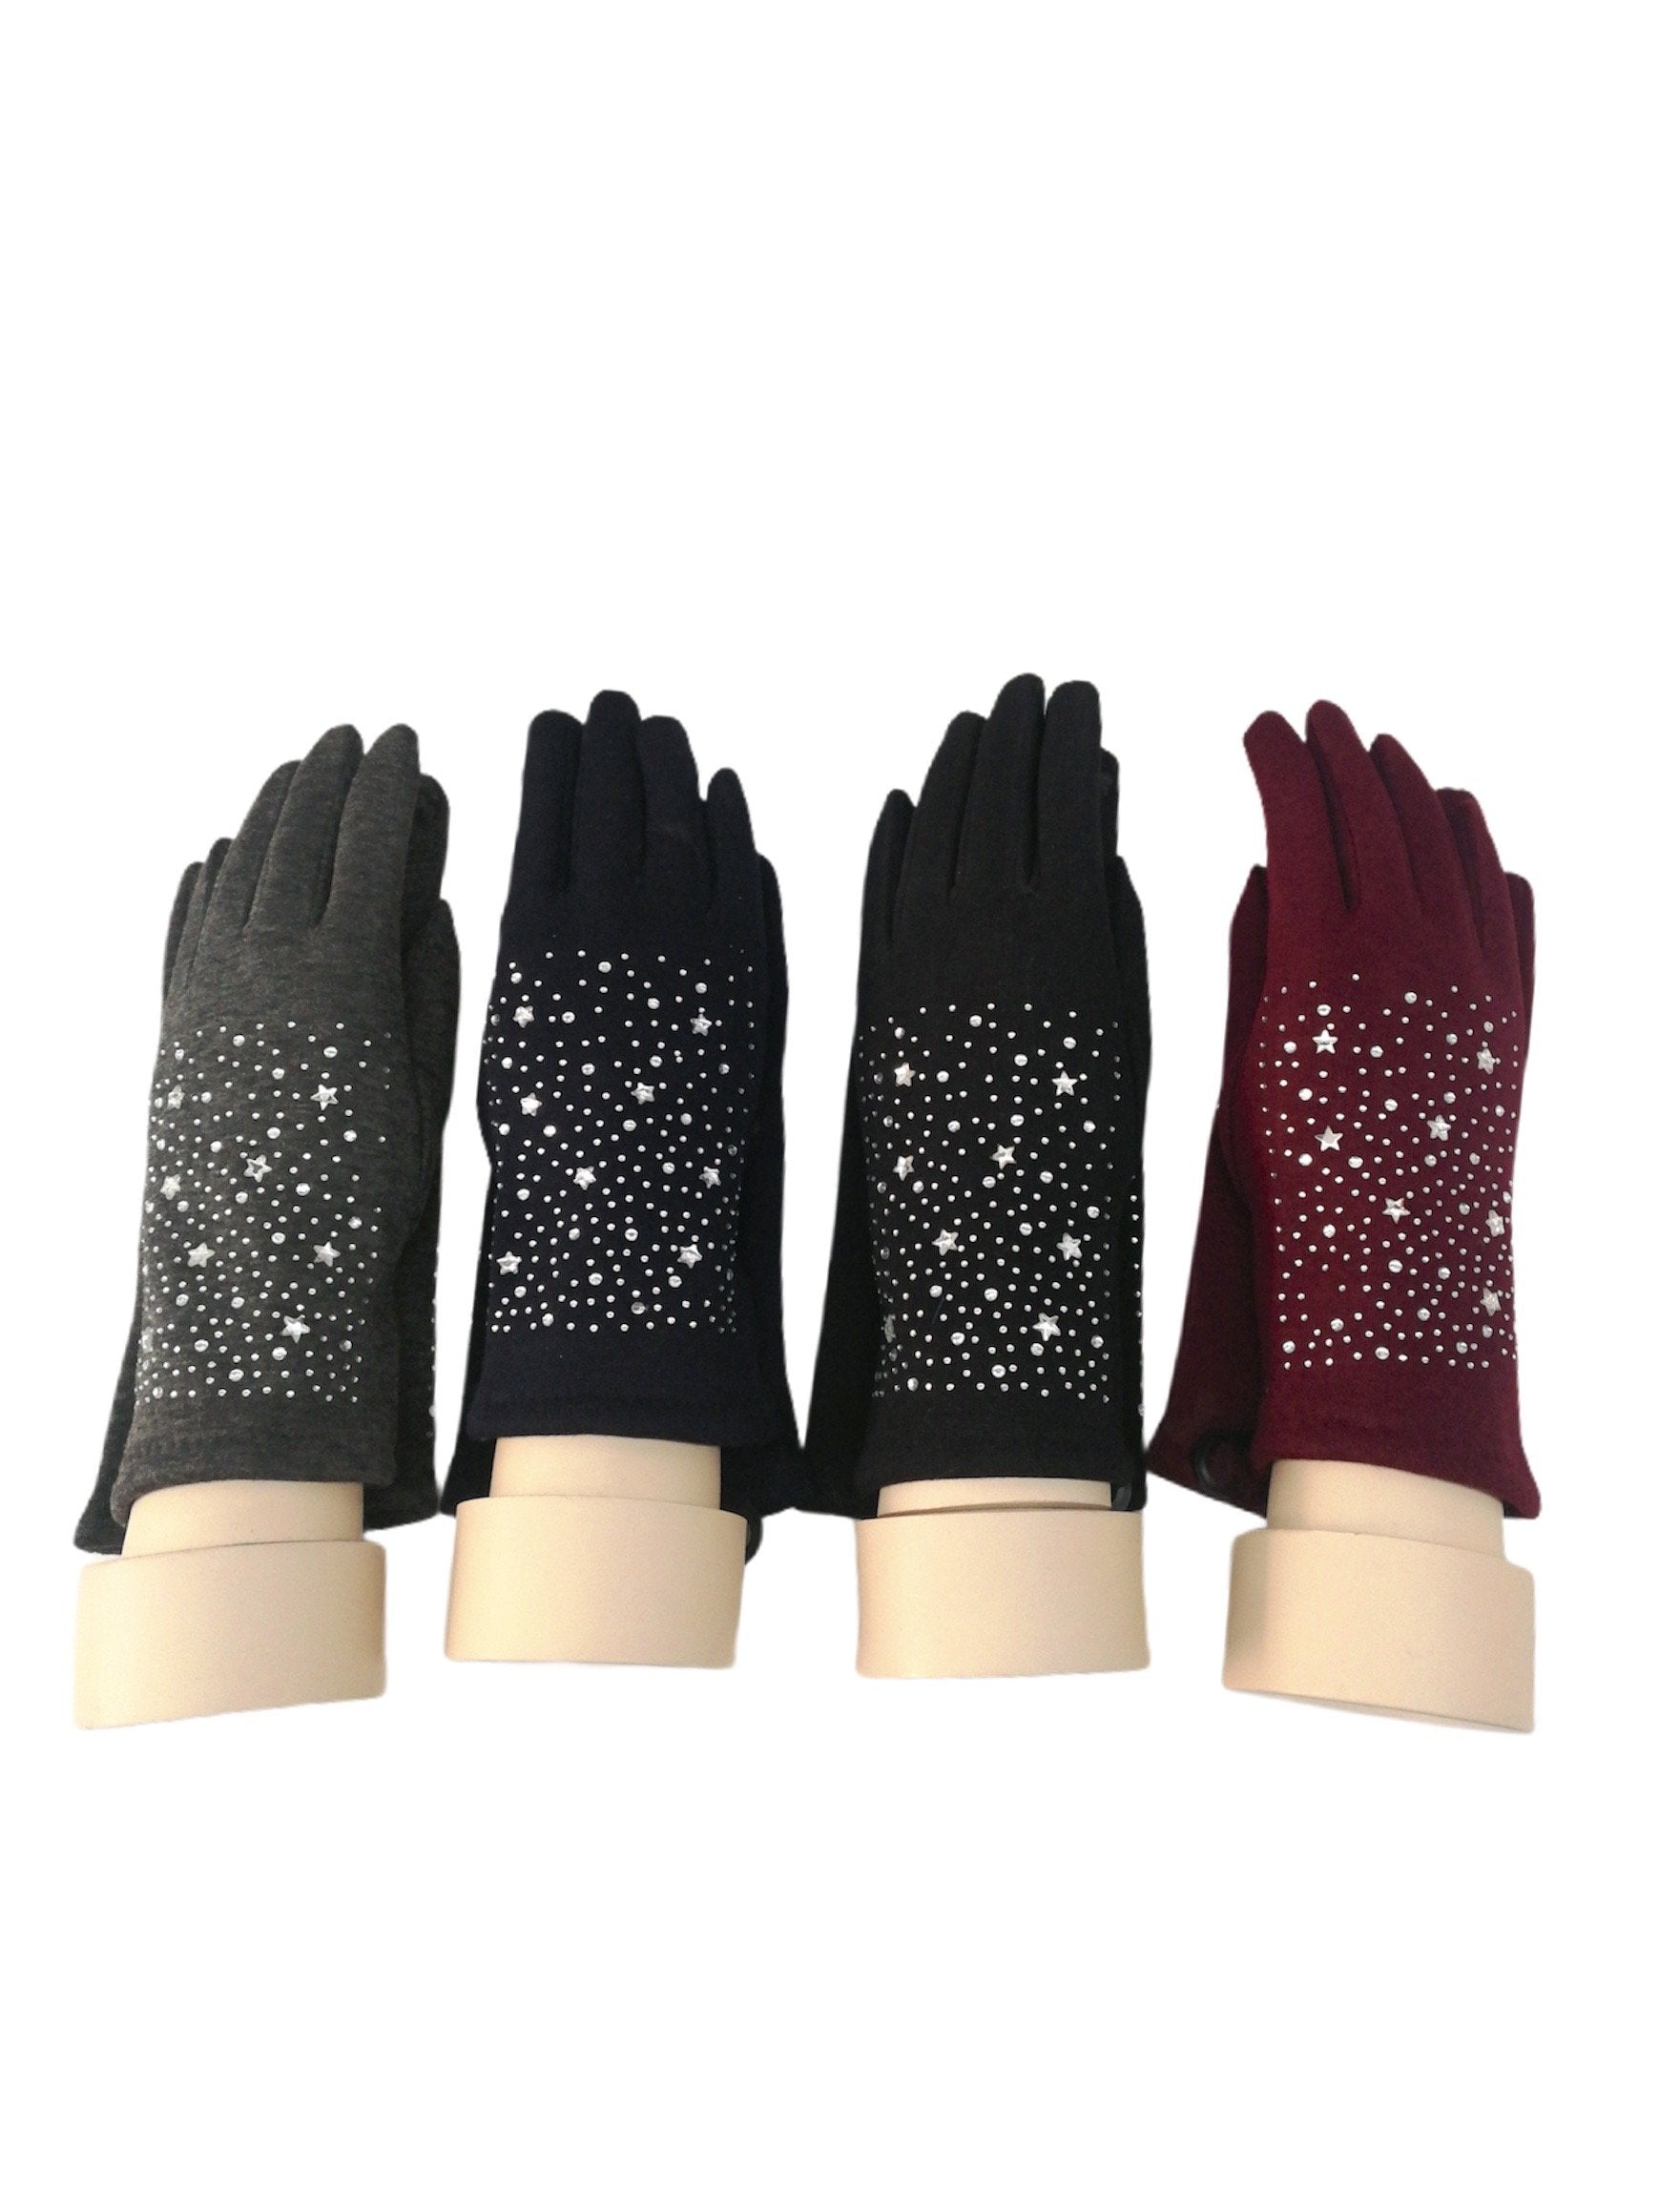 Tactile gloves with star pattern lining (x12)